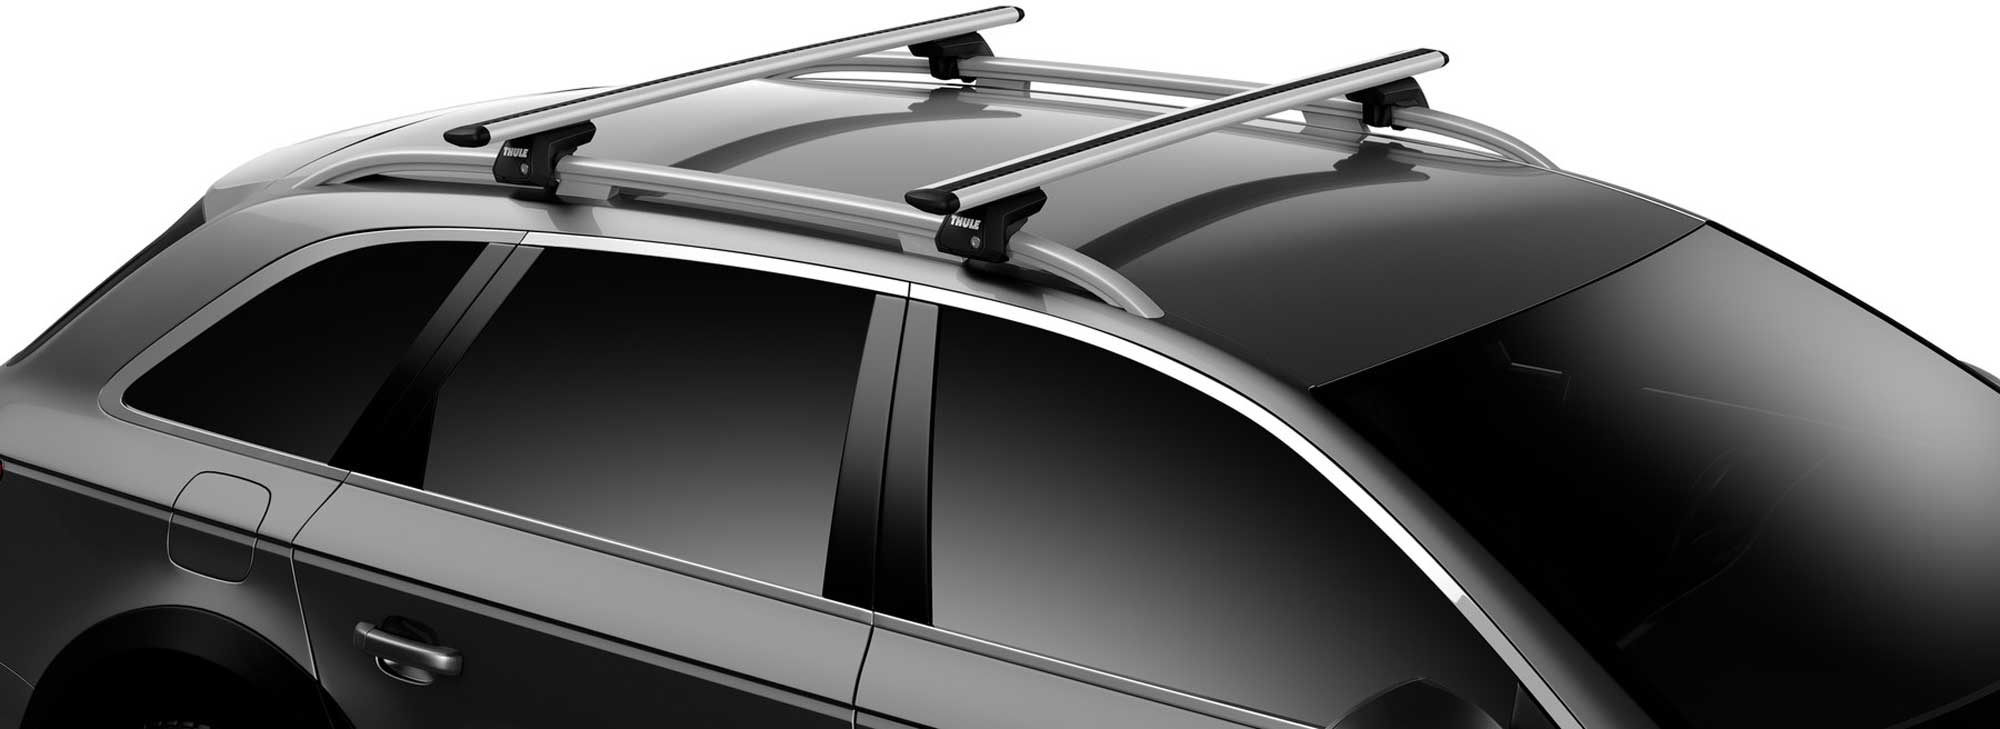 Roof rack component